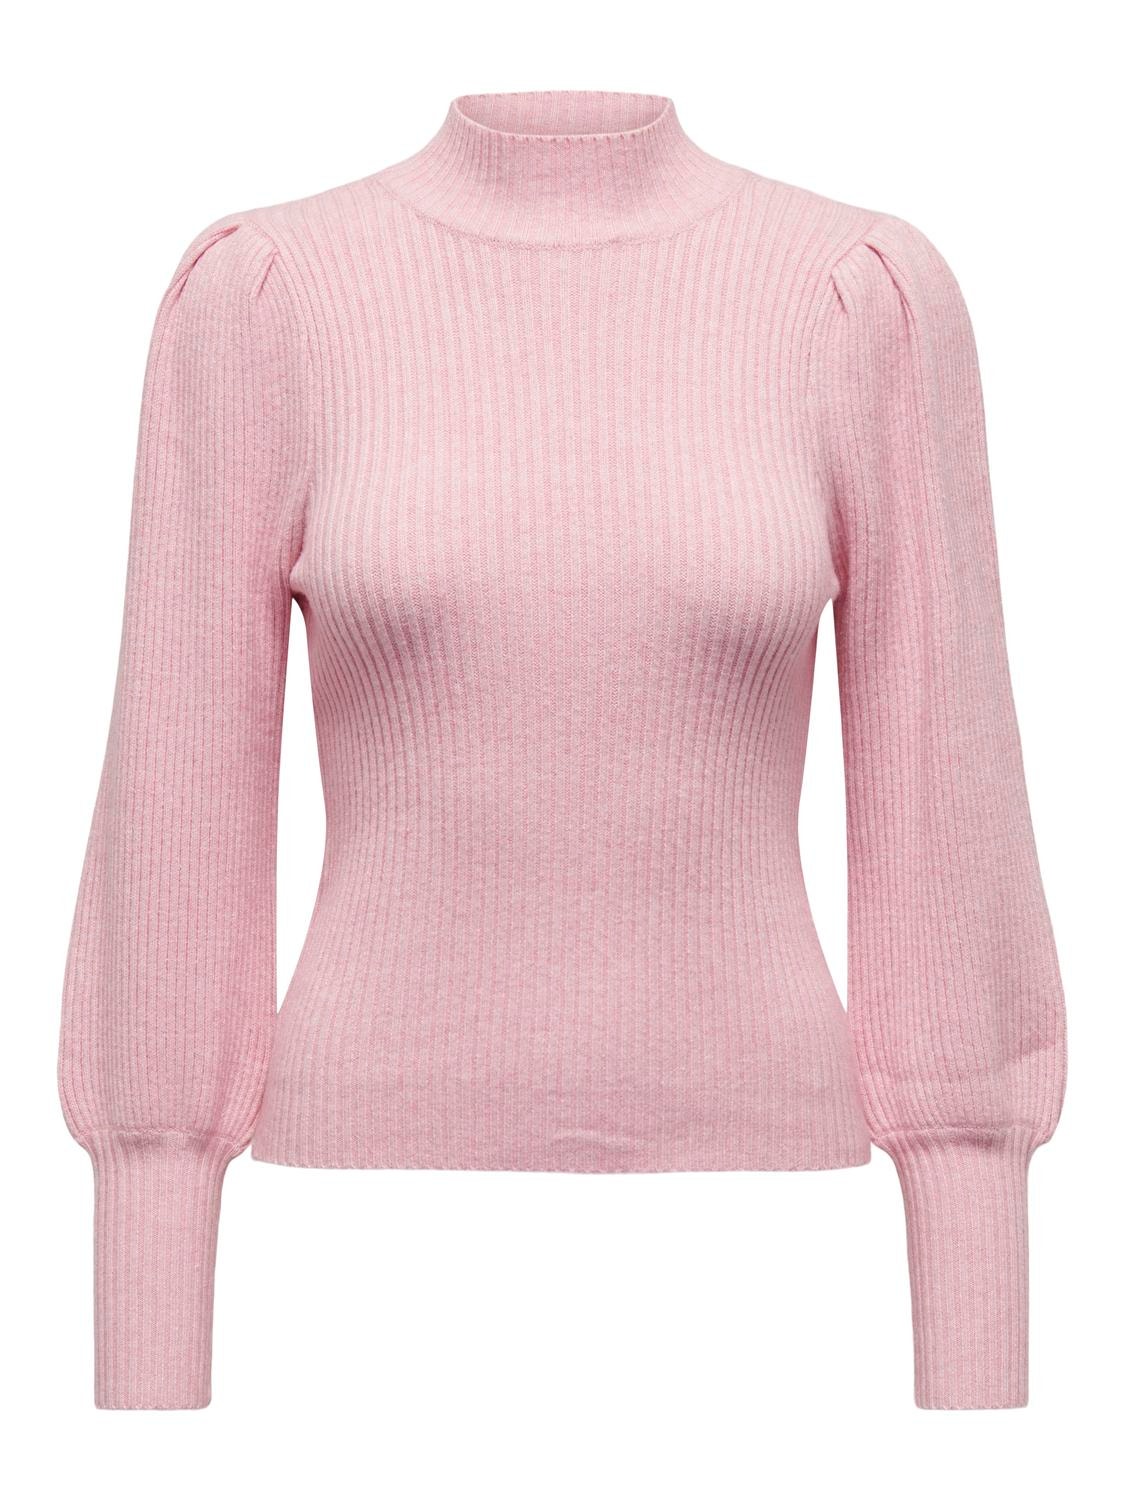 ONLY High neck Knitted Pullover -Light Pink - 15232494